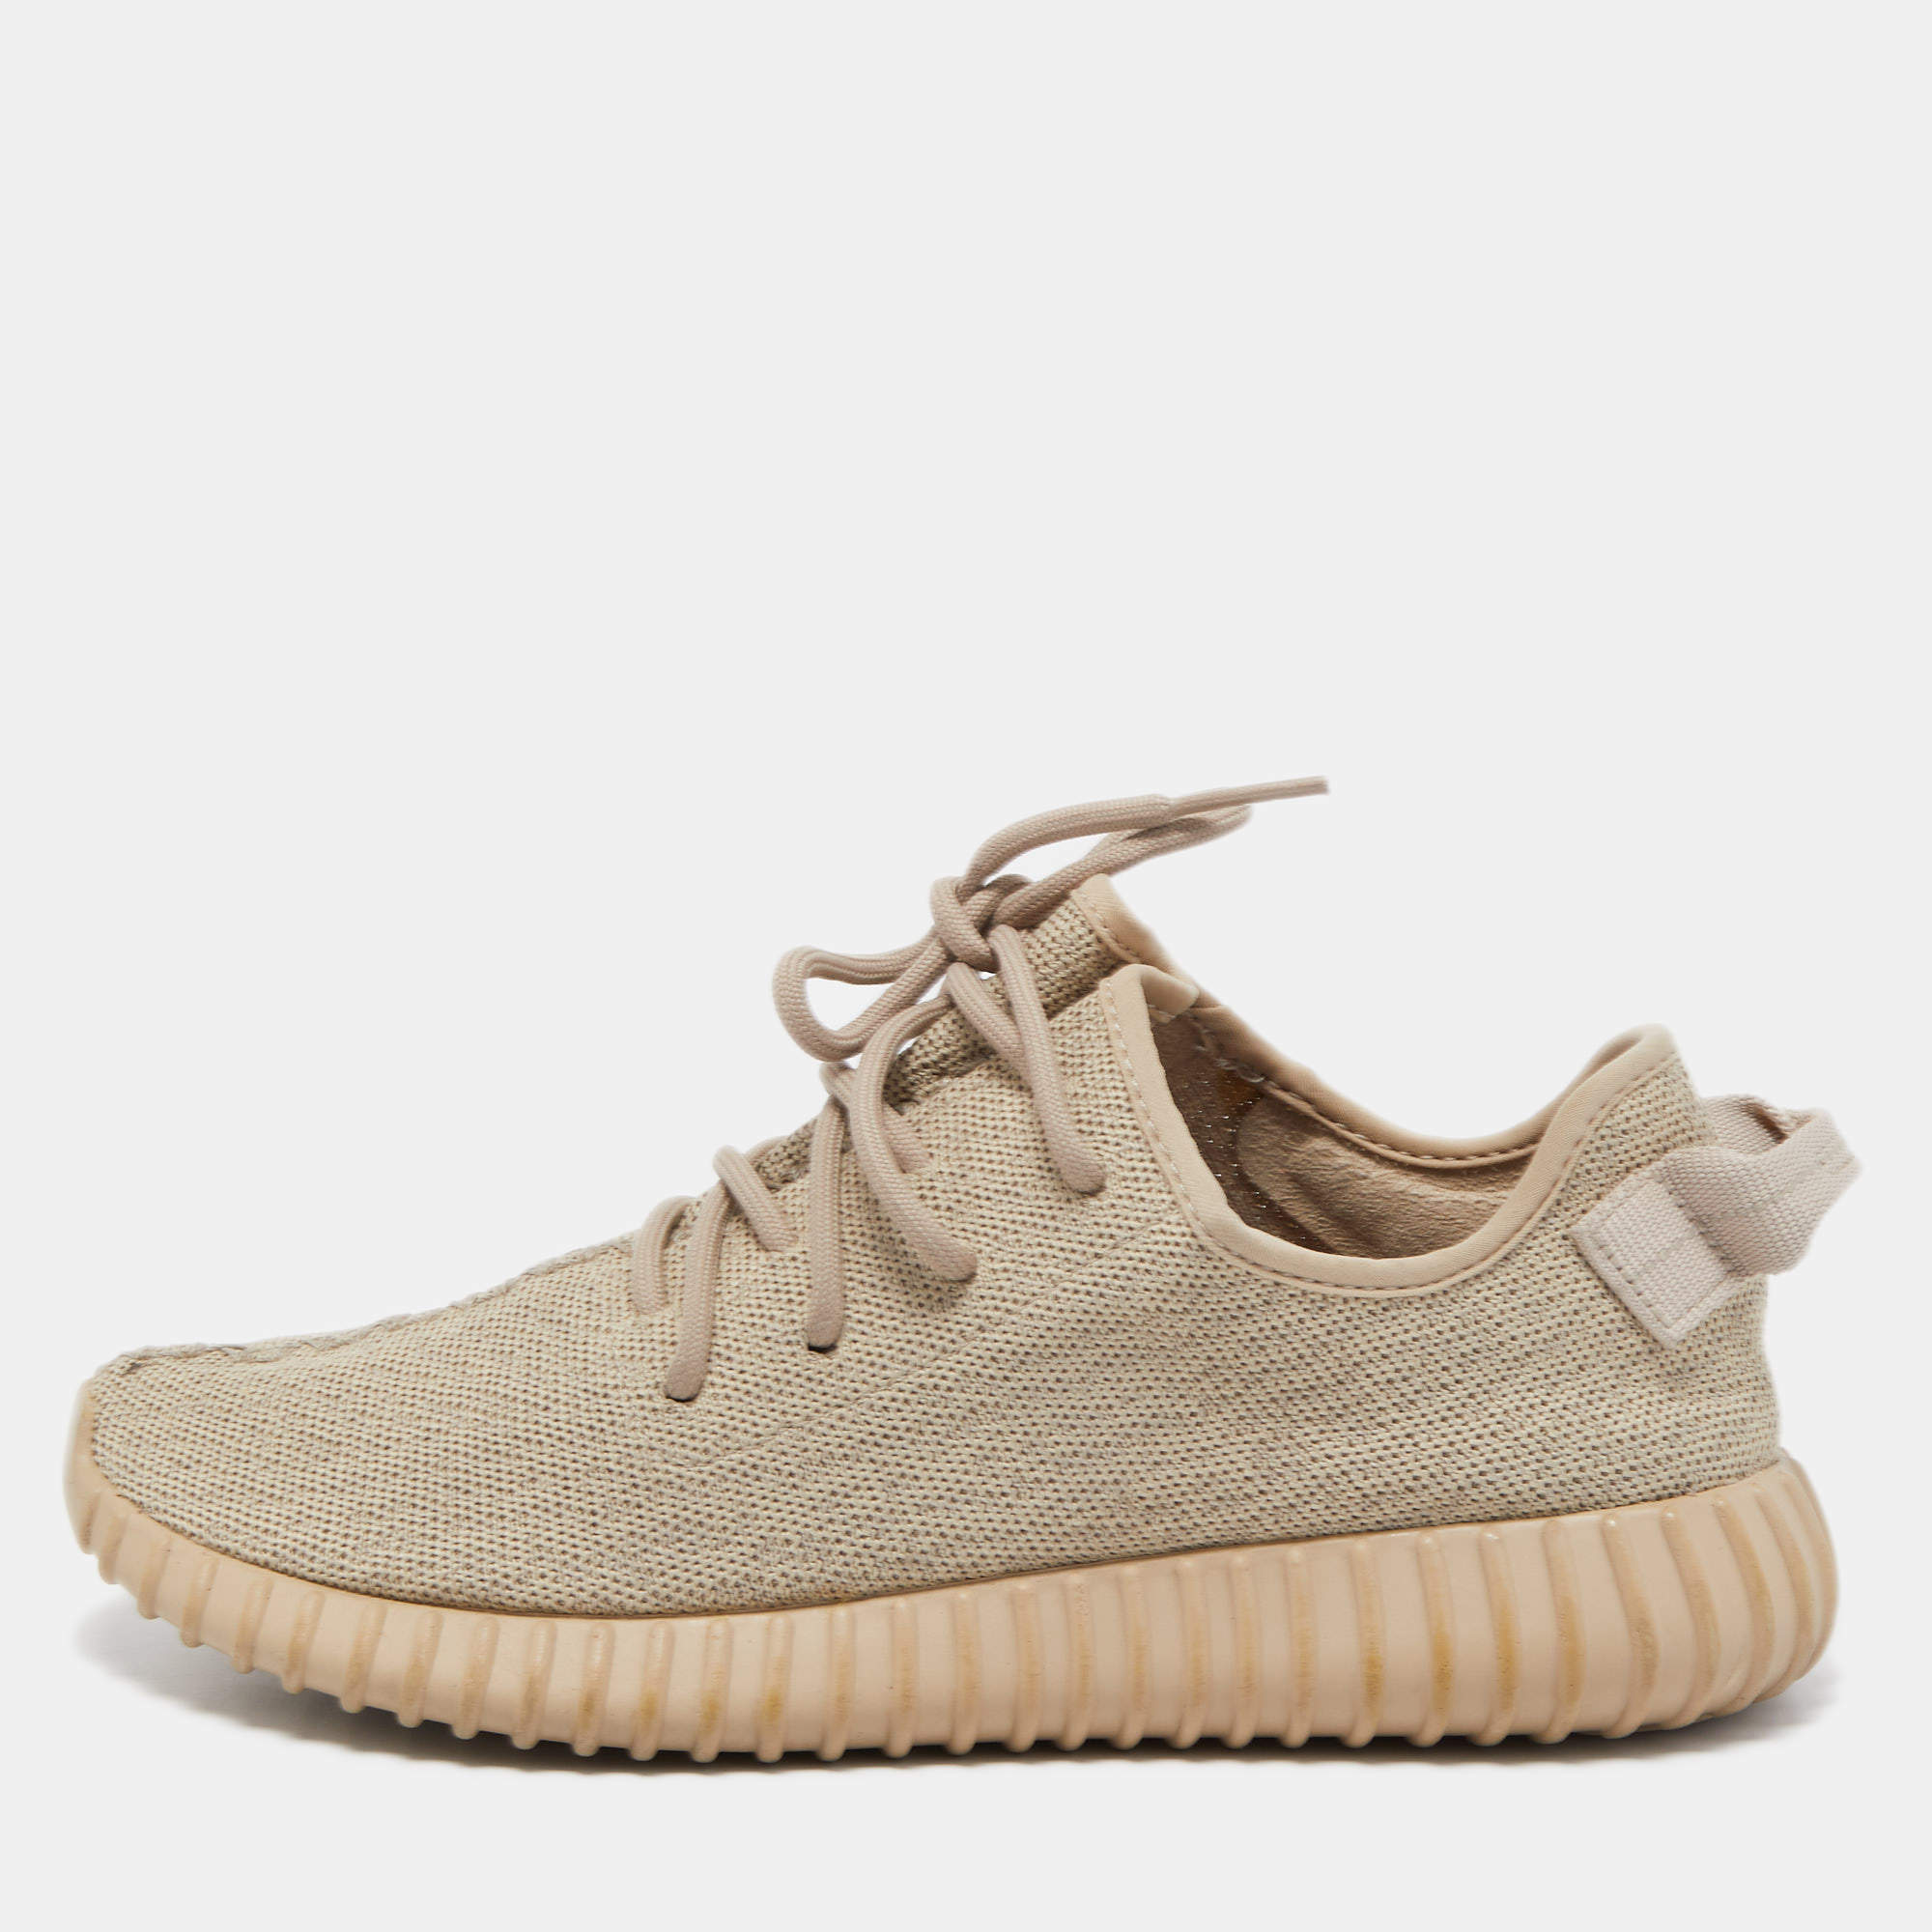 Ung Overskyet Tilsvarende Yeezy x Adidas Brown Suede Boost 350 V2 Oxford Tan Sneakers Size 42 Yeezy x  Adidas | TLC